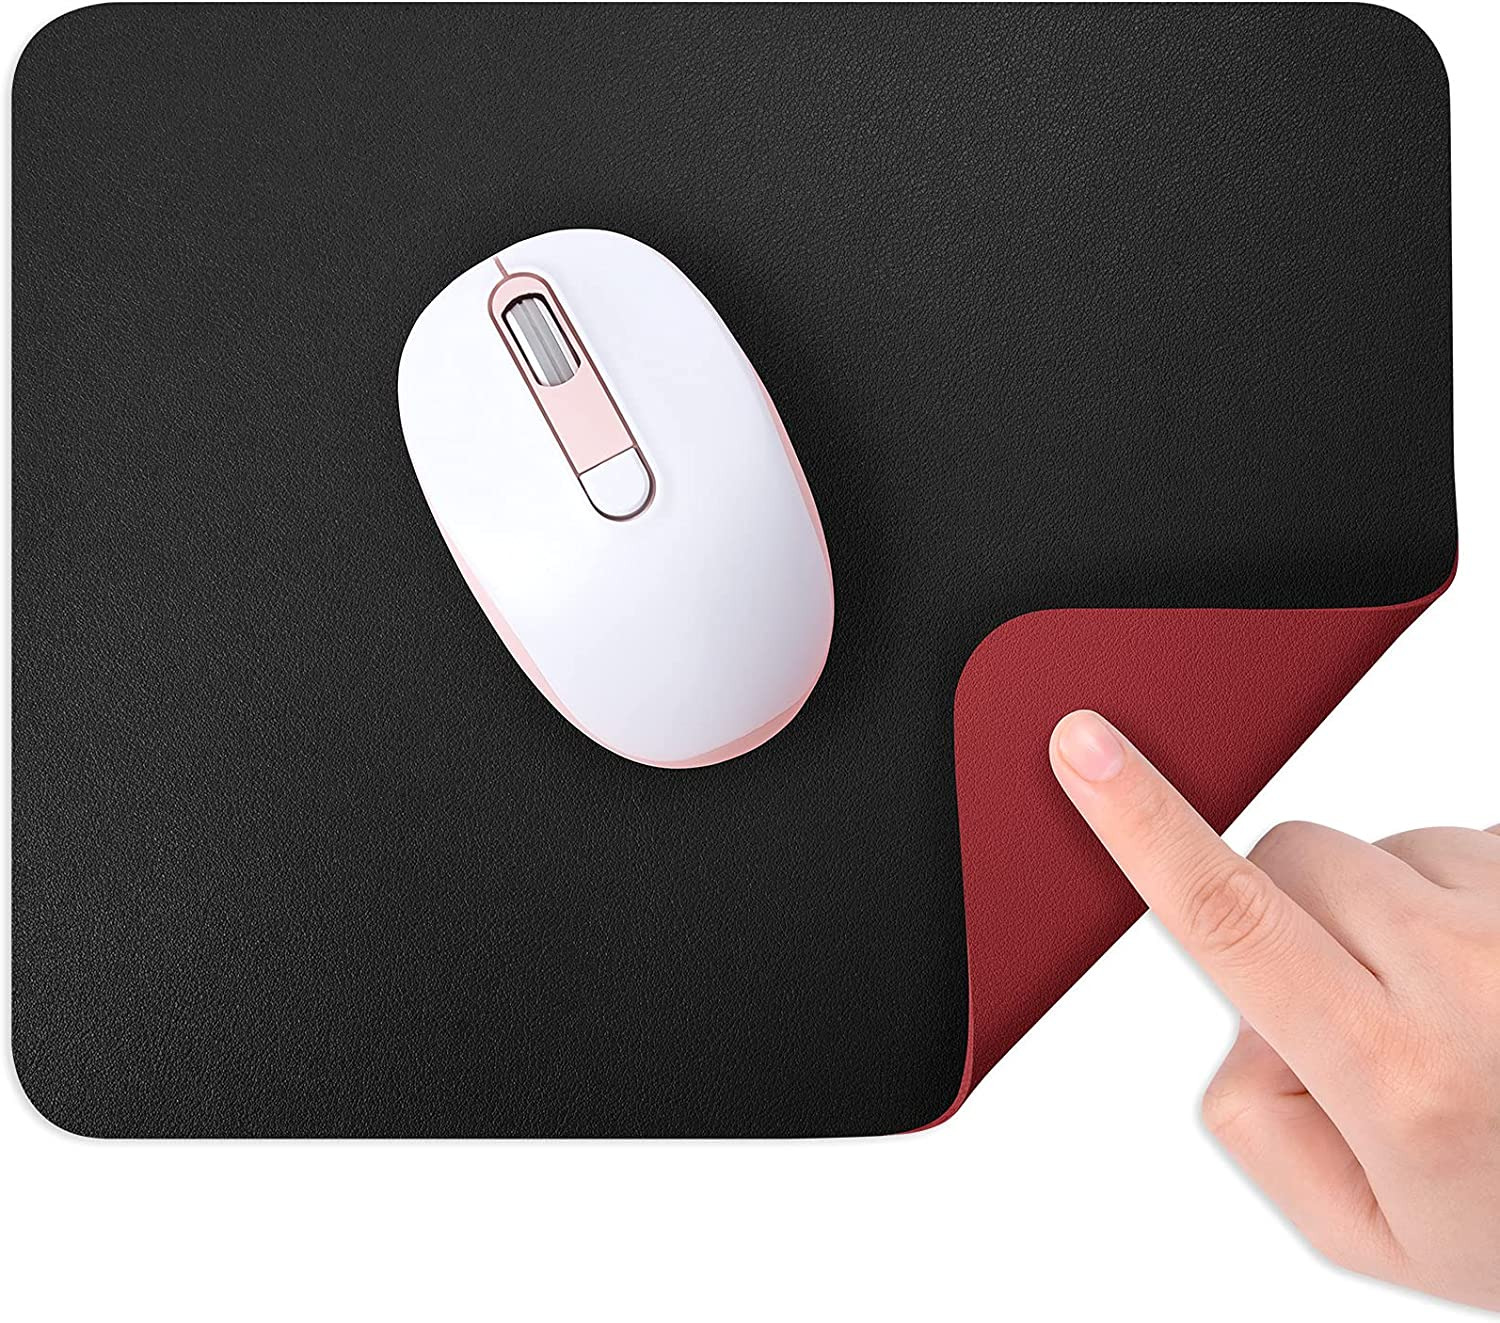 Mouse Pad, Double-Sided PU Leather Small round Mousepad 10.2 X 8.7 Inch, Anti-Sl